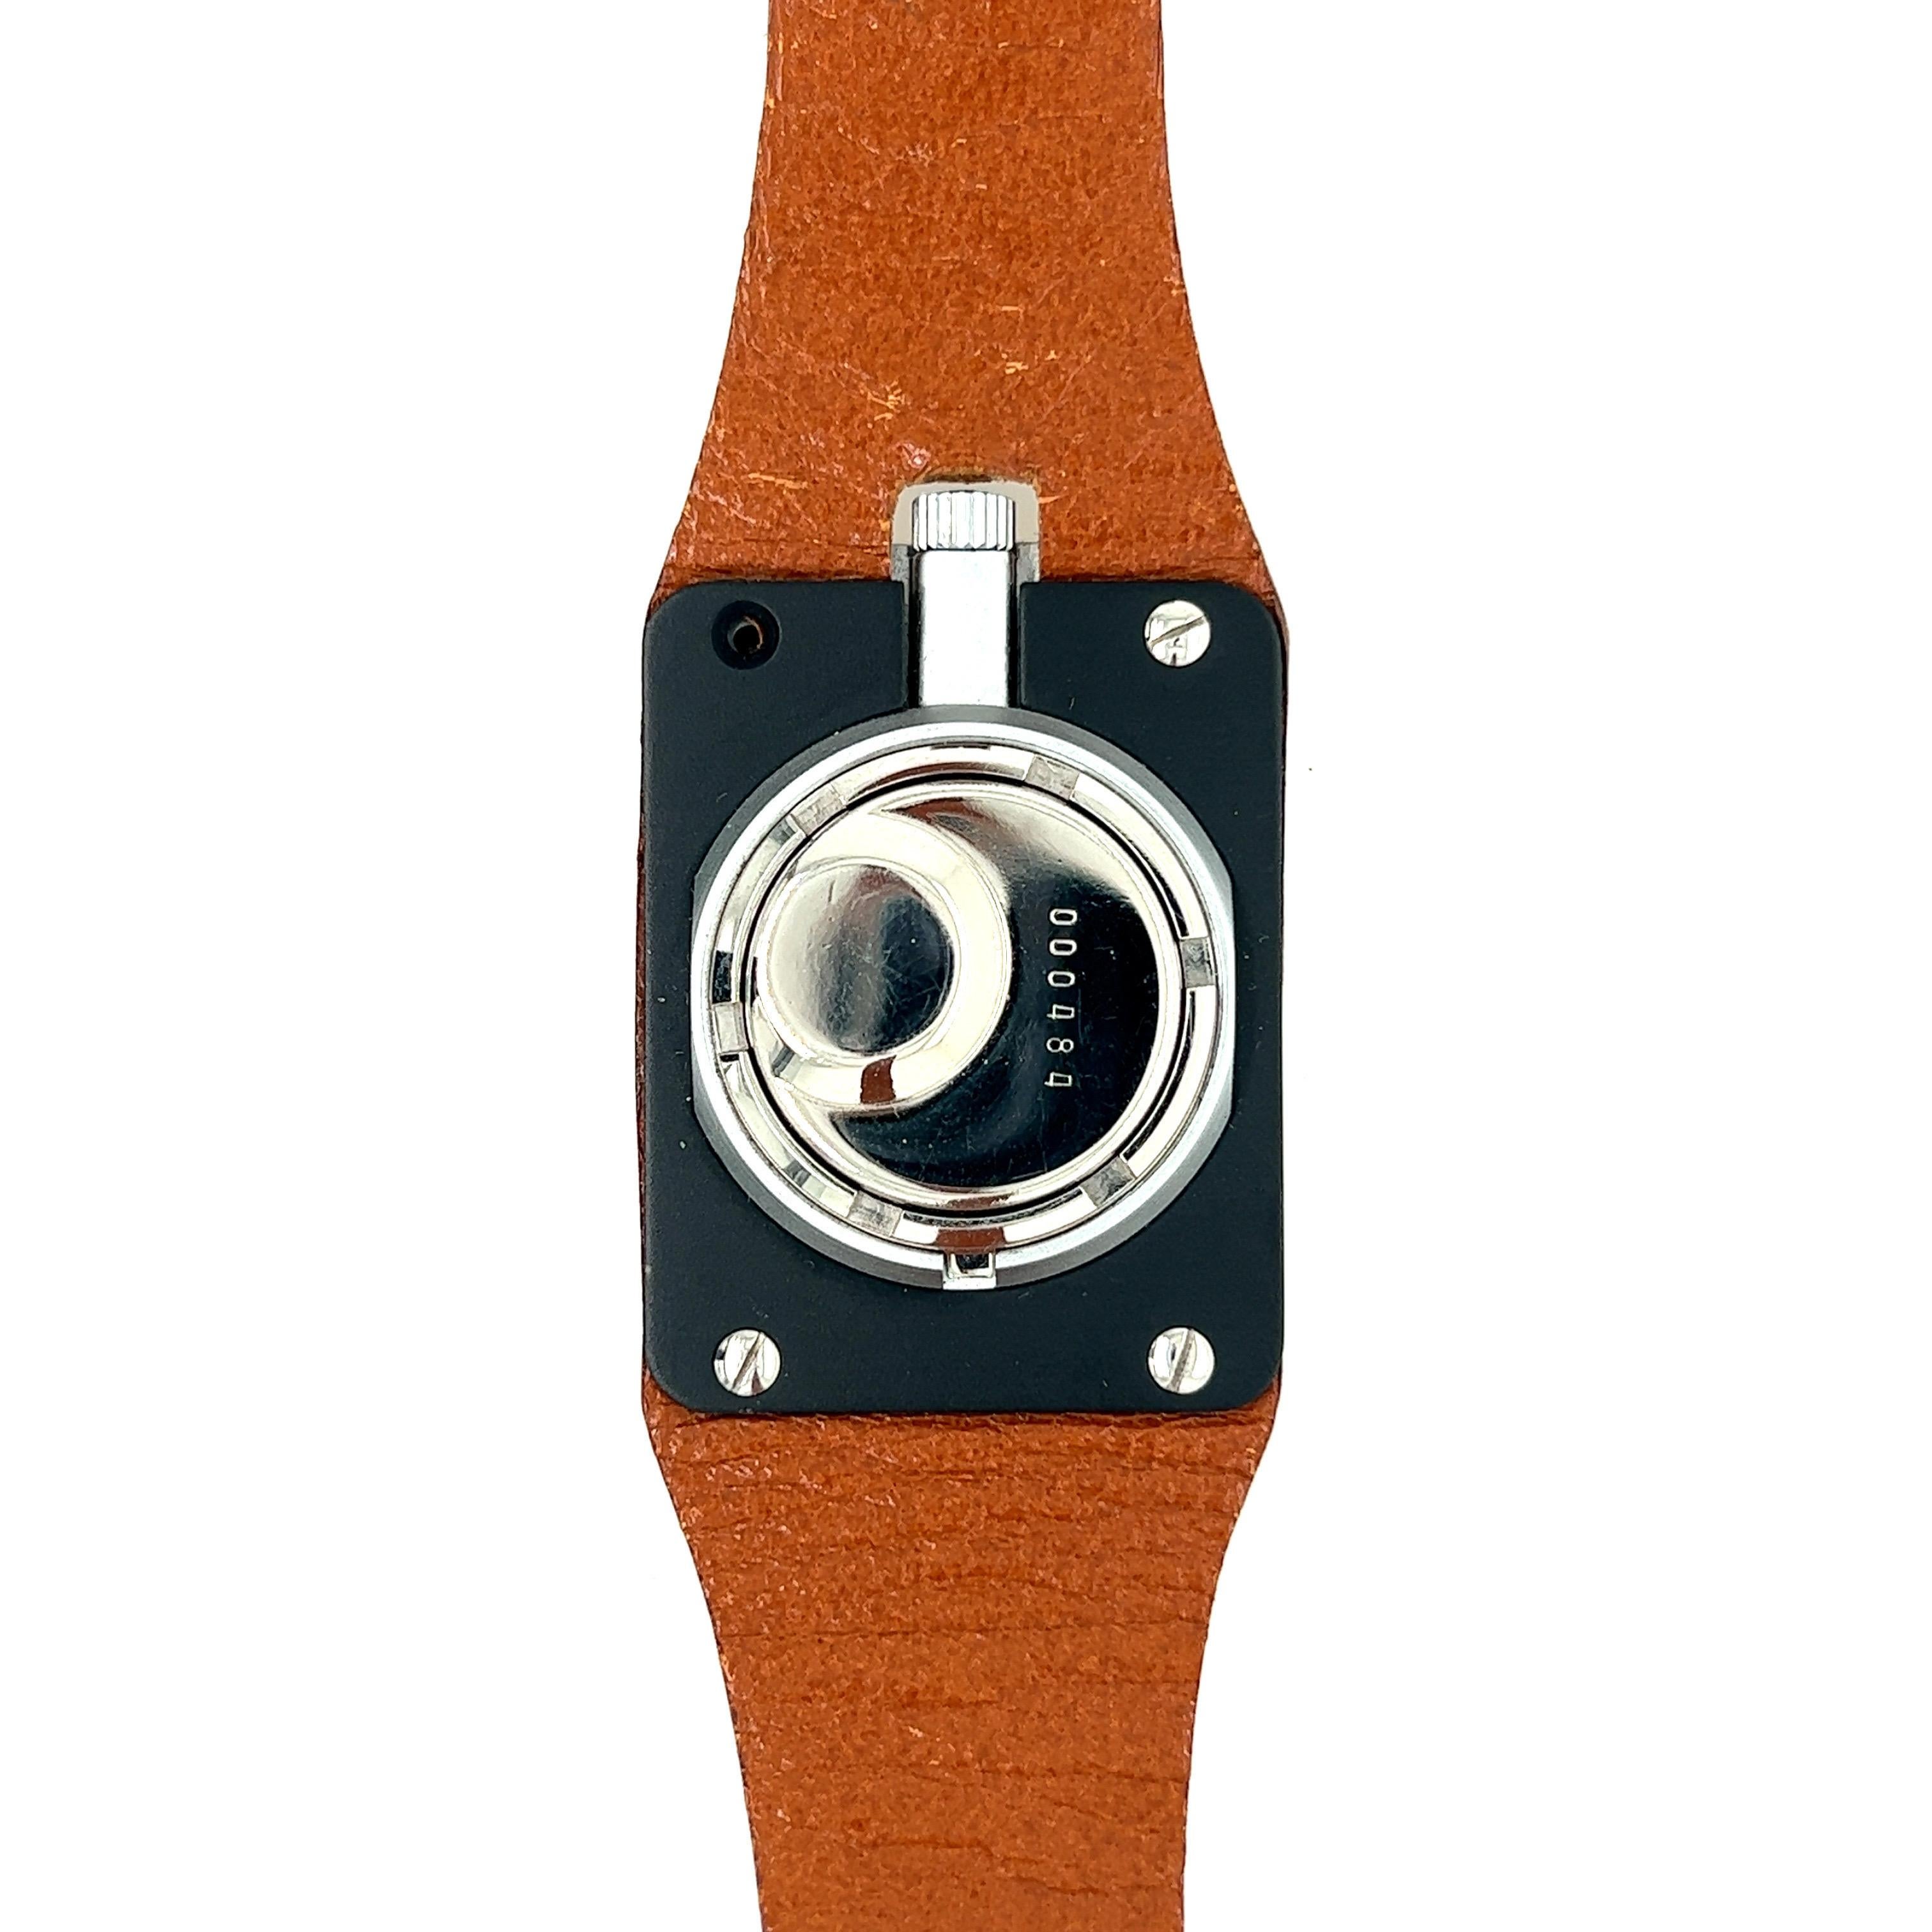 LIP Women Watch Brown Strap White Dial

This retro Lip Frigidaire watch, designed by Roger Heel in 1976, is a true testament to its time. With a high quality brown leather strap, functionality for hours, minutes, seconds, a central second hand and a